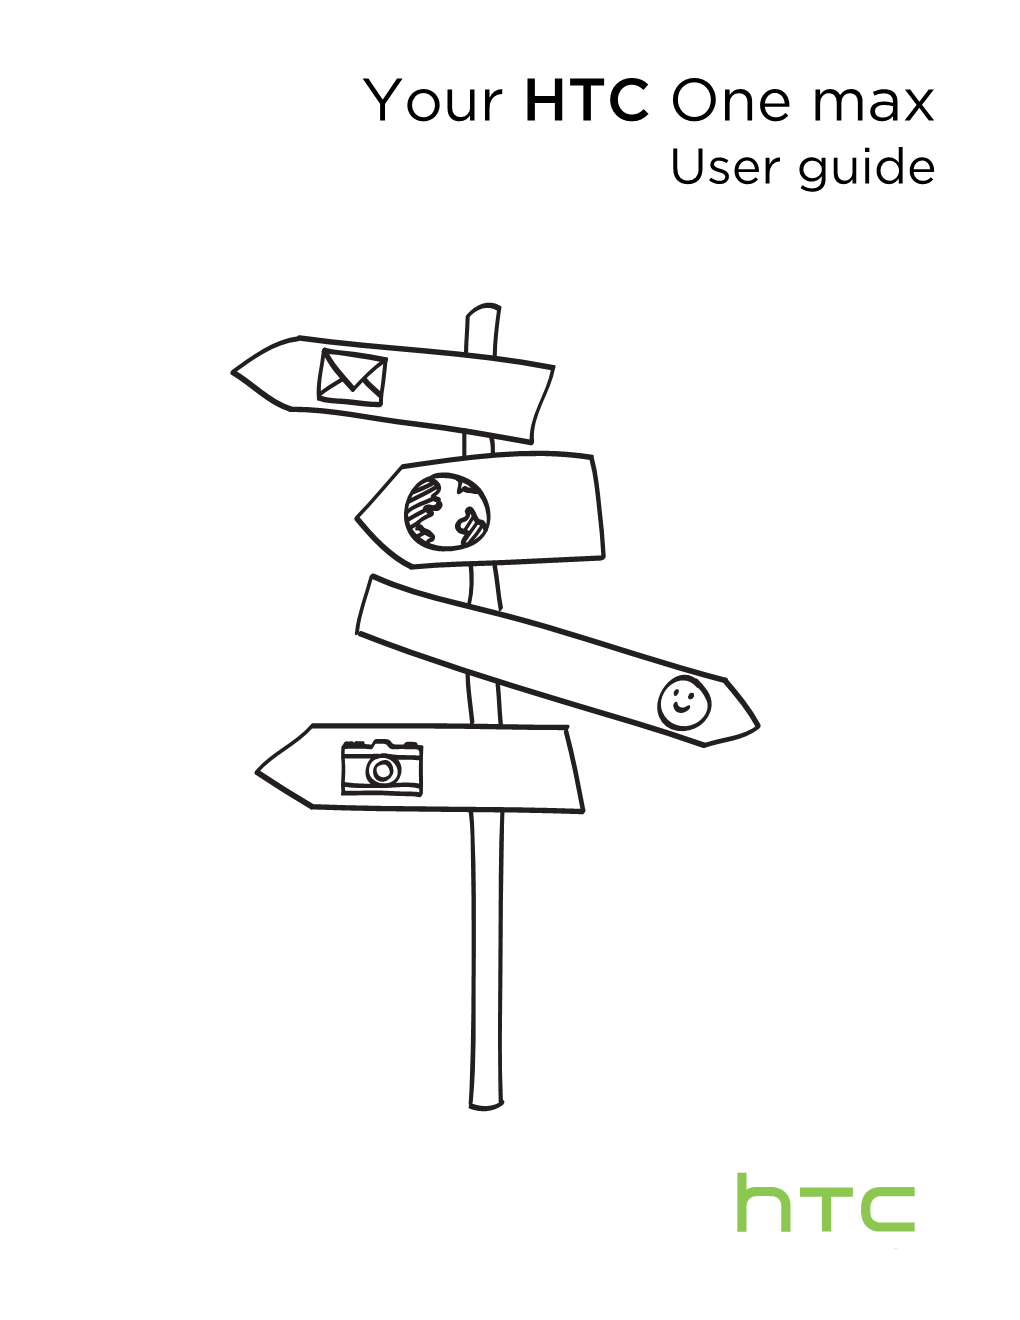 Your HTC One Max User Guide 2 Contents Contents